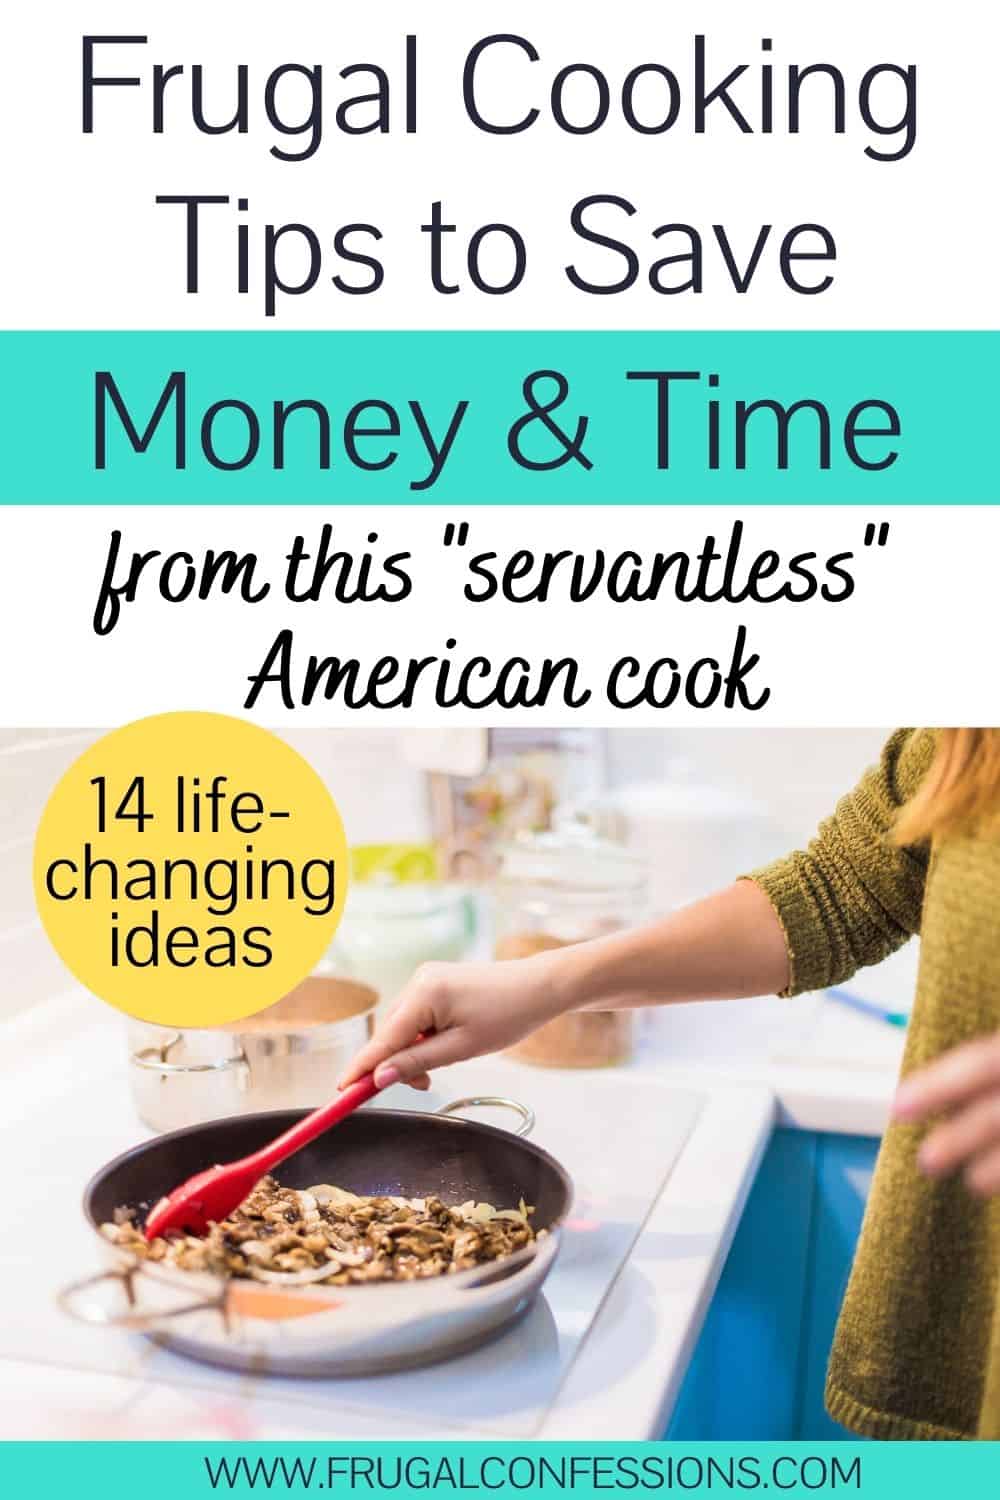 woman cooking on a stovetop with red spatula, text overlay "frugal cooking tips to save money & time"